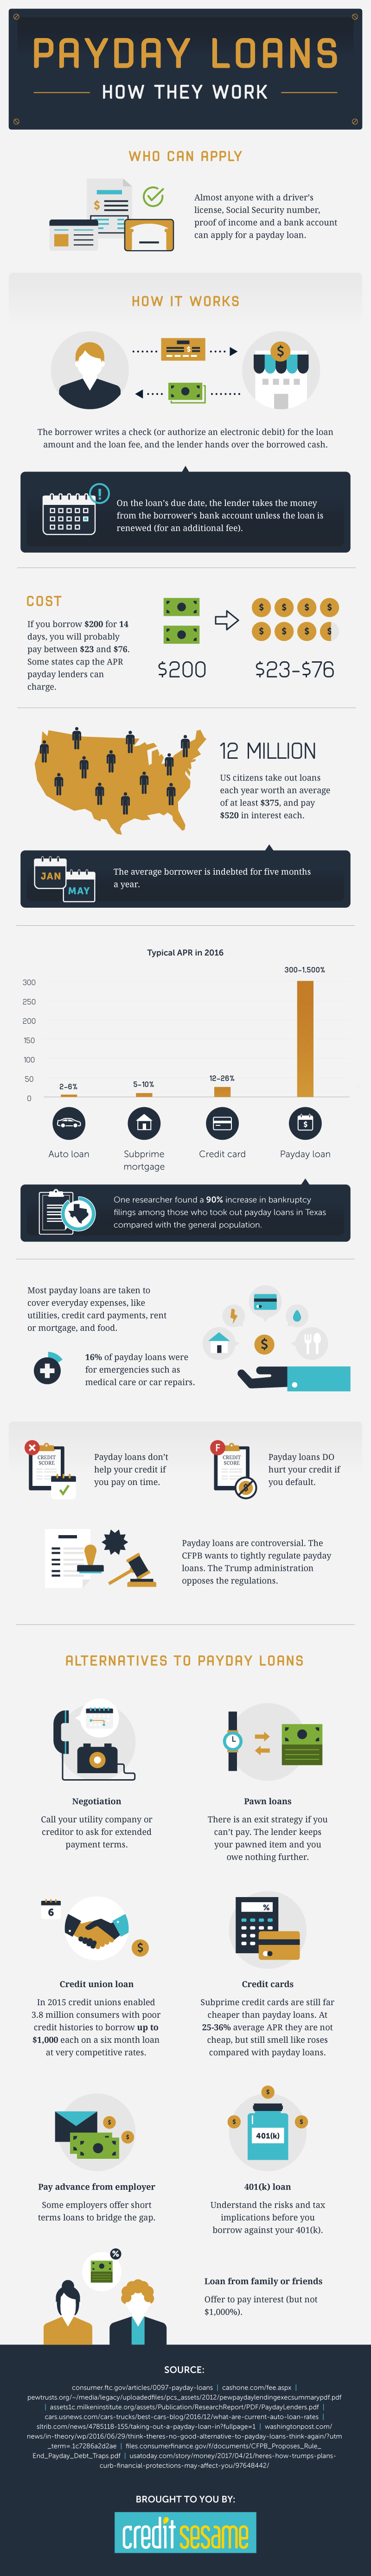 Infographic for Payday Loans Infographic- How They Work